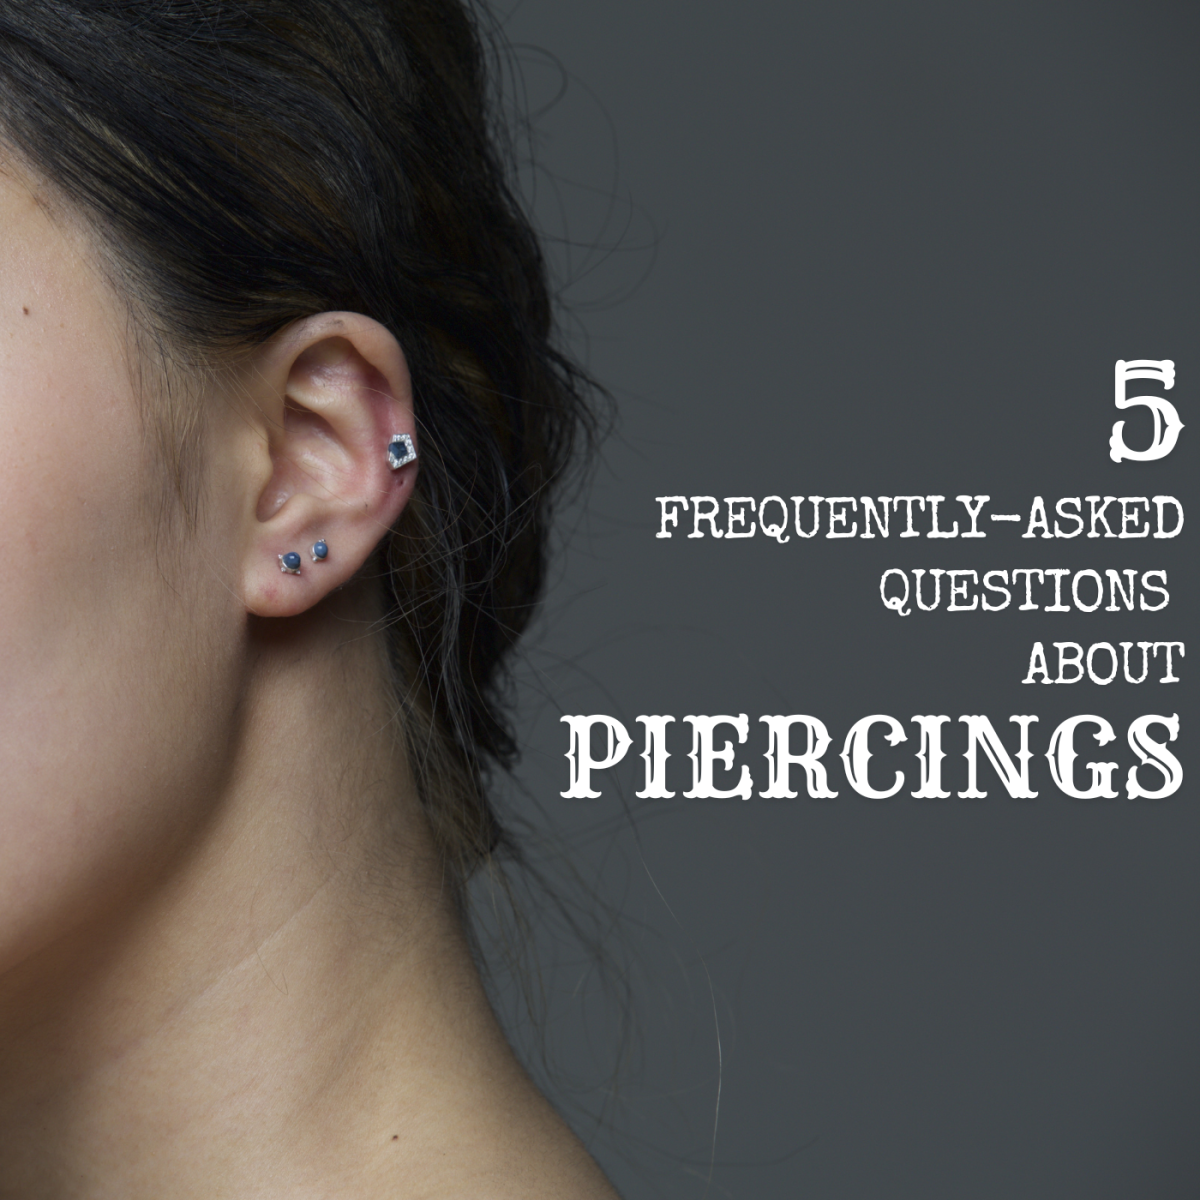 Here are five common questions (and answers!) about piercings 